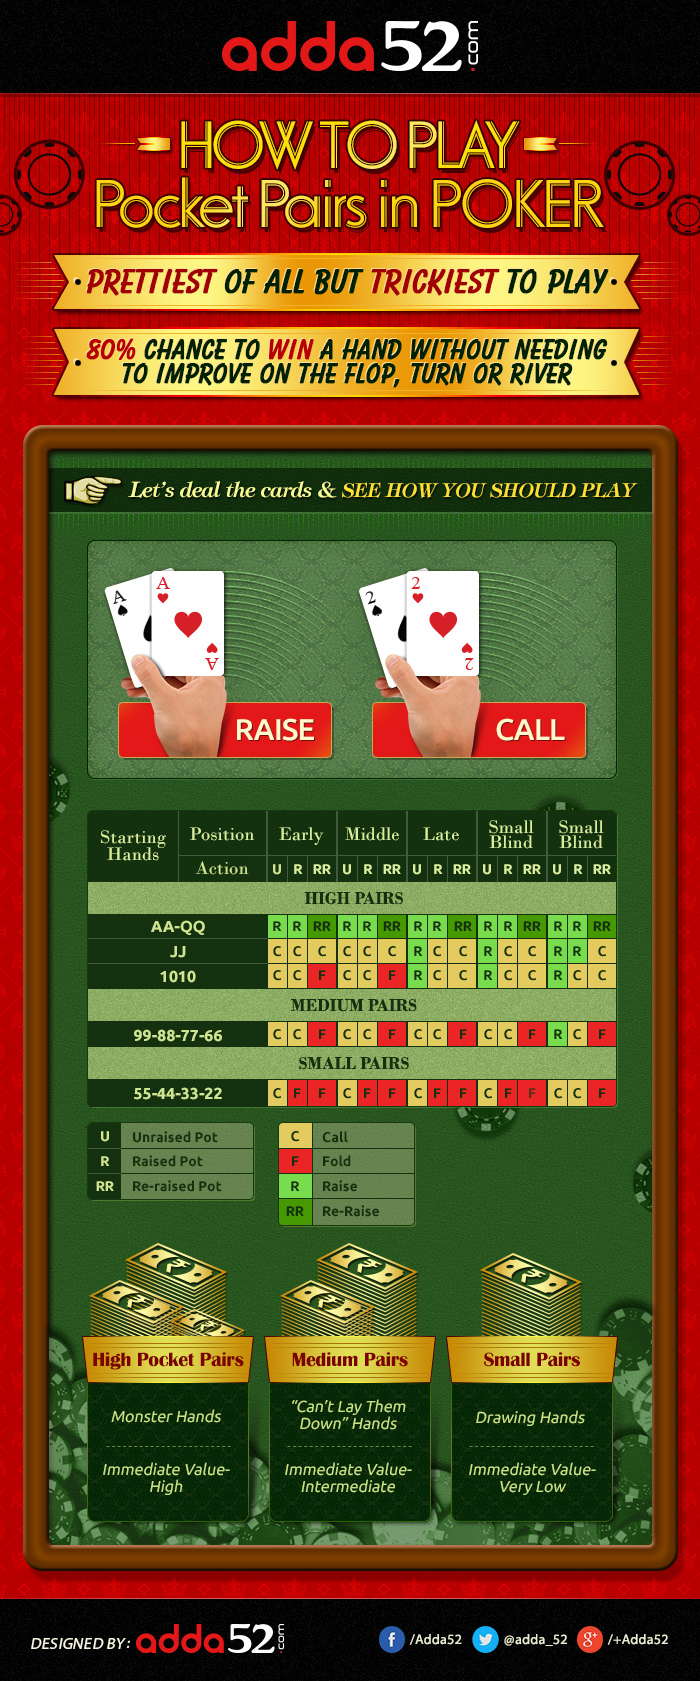 How to Play Pocket Pairs